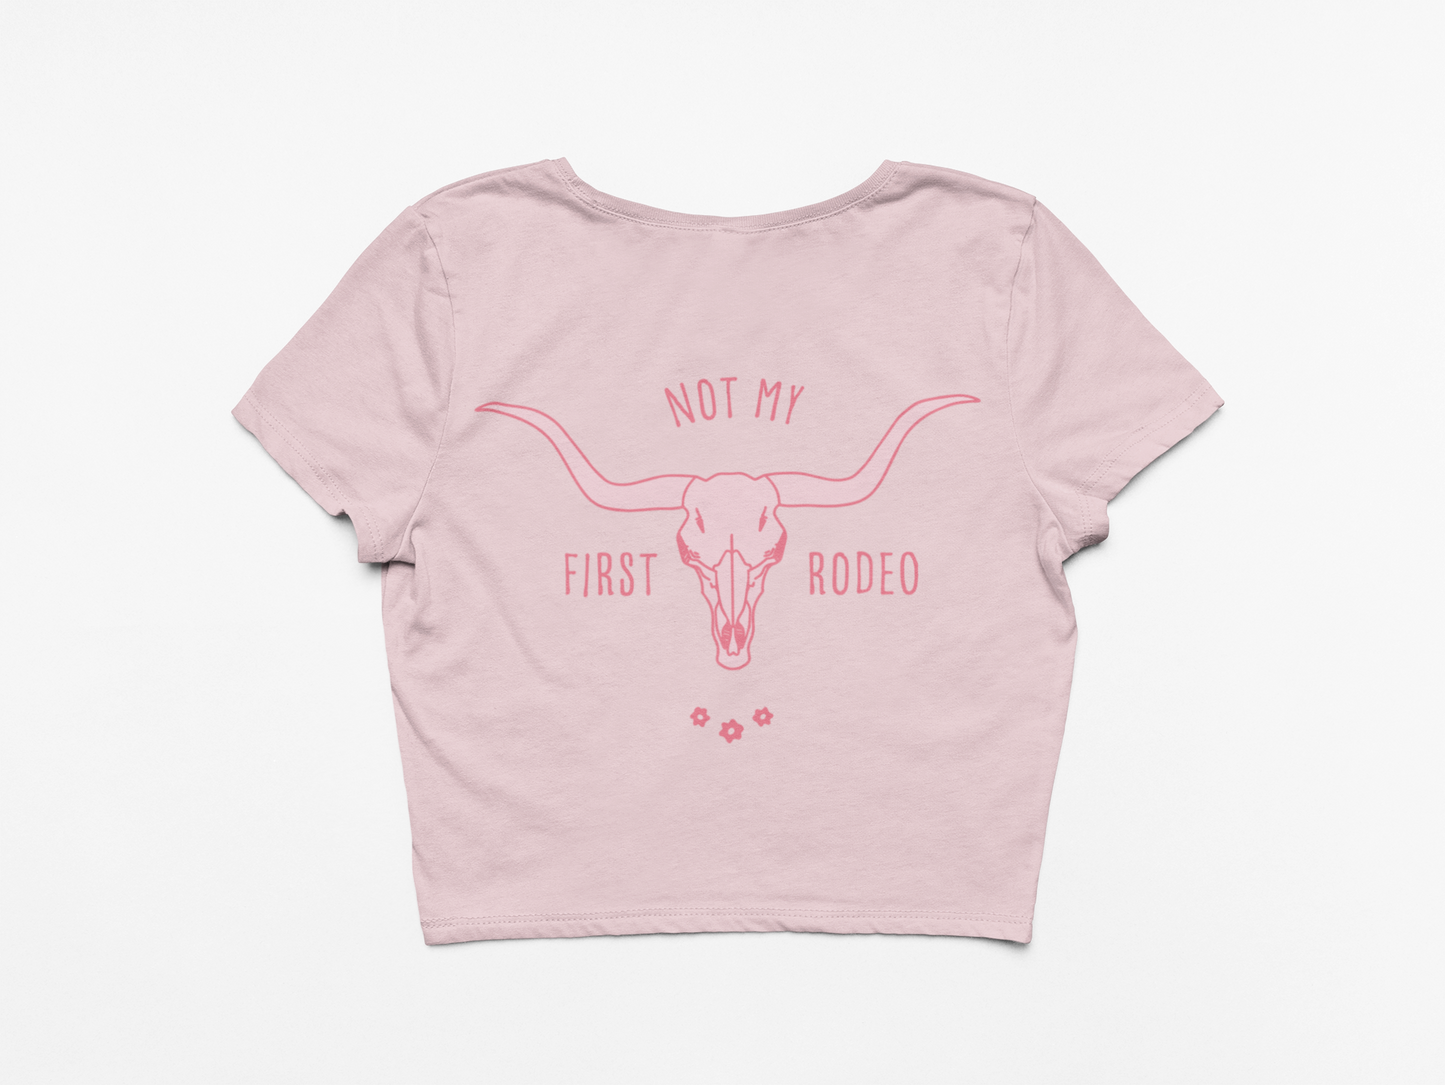 "Not My First Rodeo" Crop